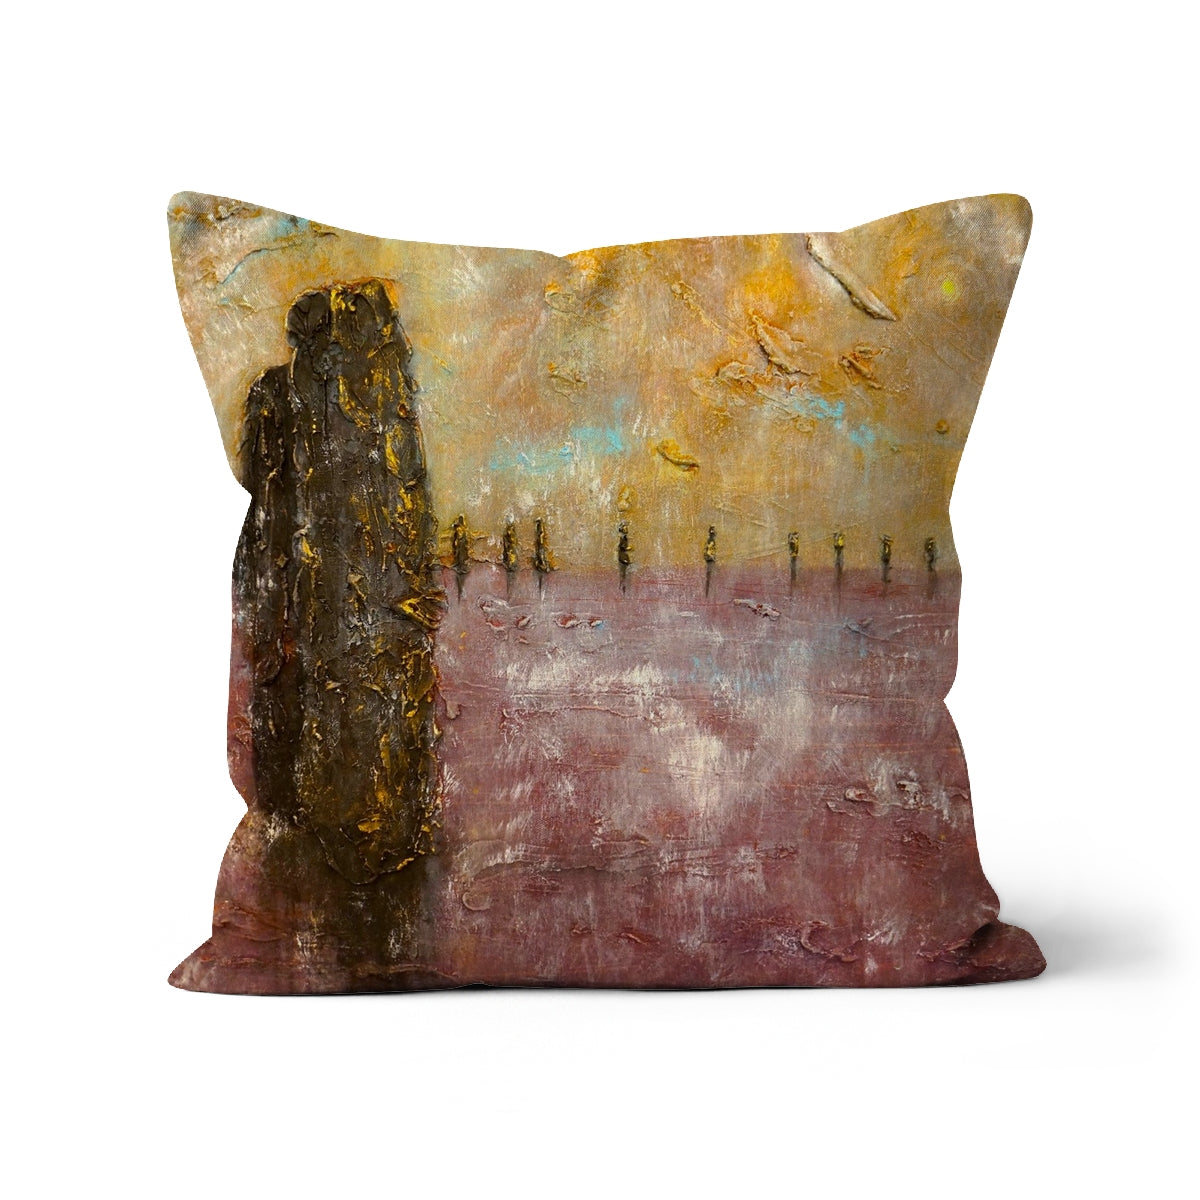 Bordgar Mist Orkney Art Gifts Cushion-Cushions-Orkney Art Gallery-Linen-16"x16"-Paintings, Prints, Homeware, Art Gifts From Scotland By Scottish Artist Kevin Hunter